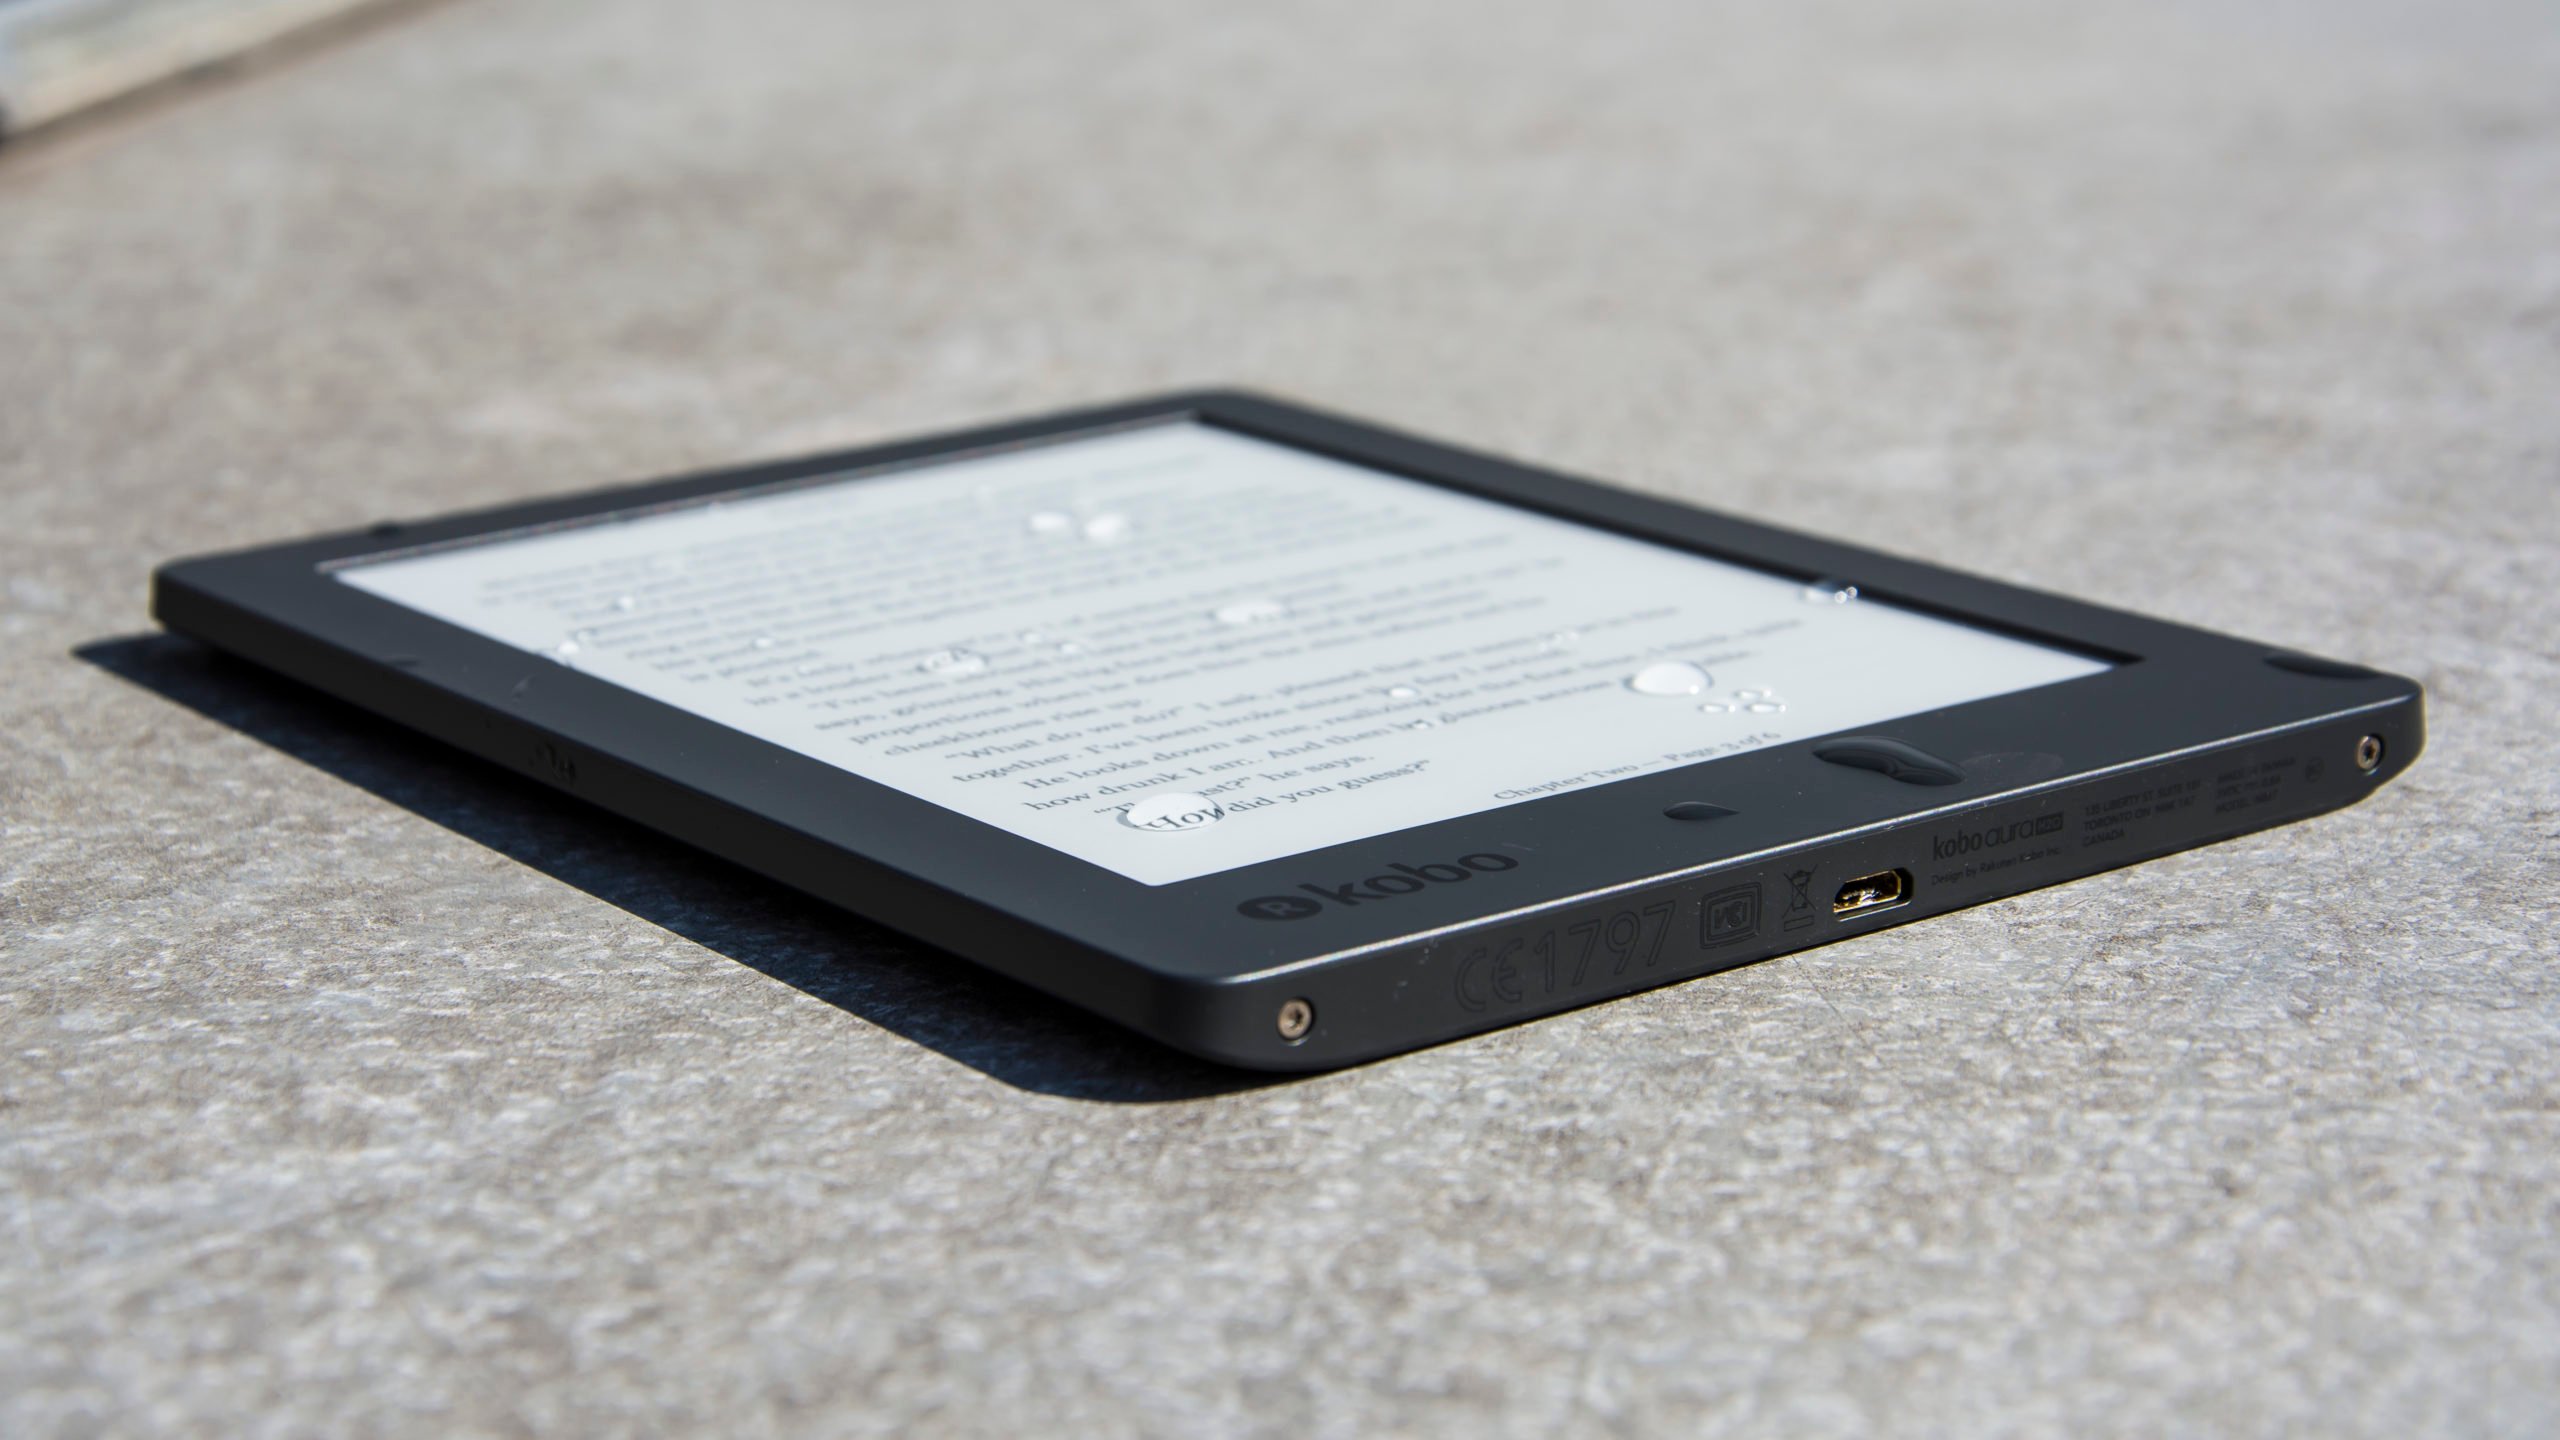 Eervol Bedachtzaam wortel Kobo Aura H20 2017 review – Kindle's distant rival provides a great read